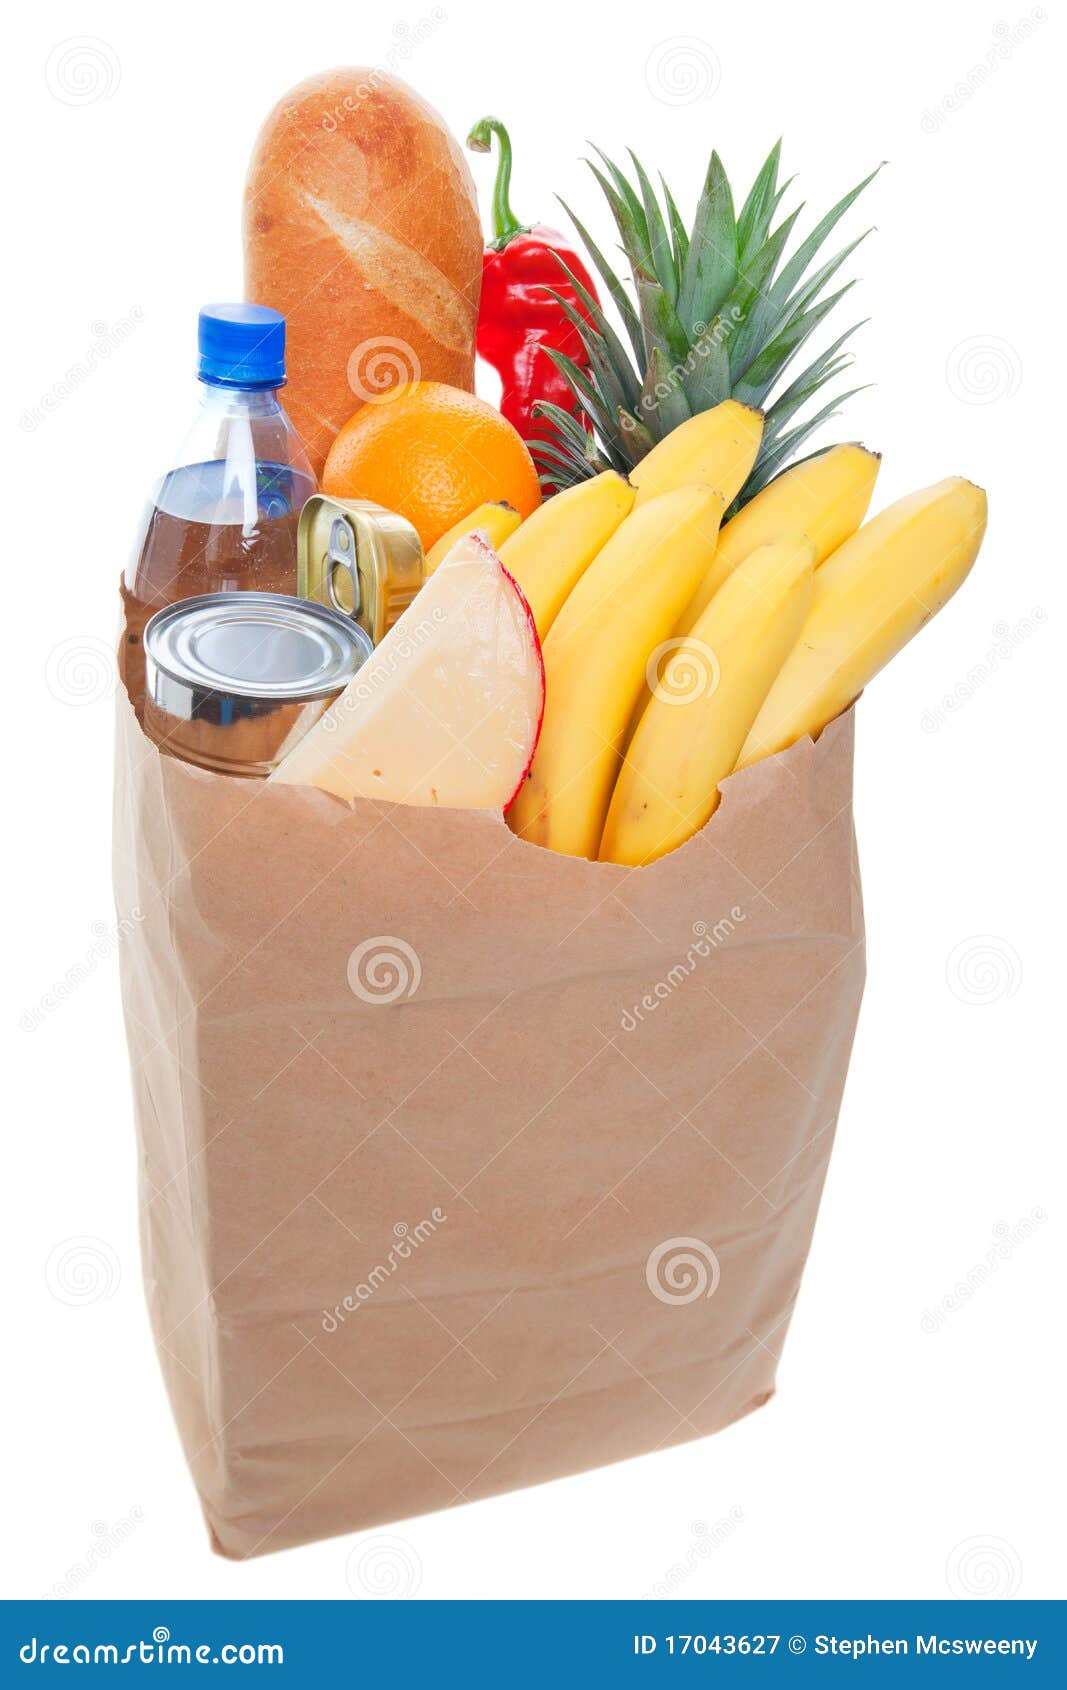 Full Grocery Bag Royalty Free Stock Photography - Image: 17043627